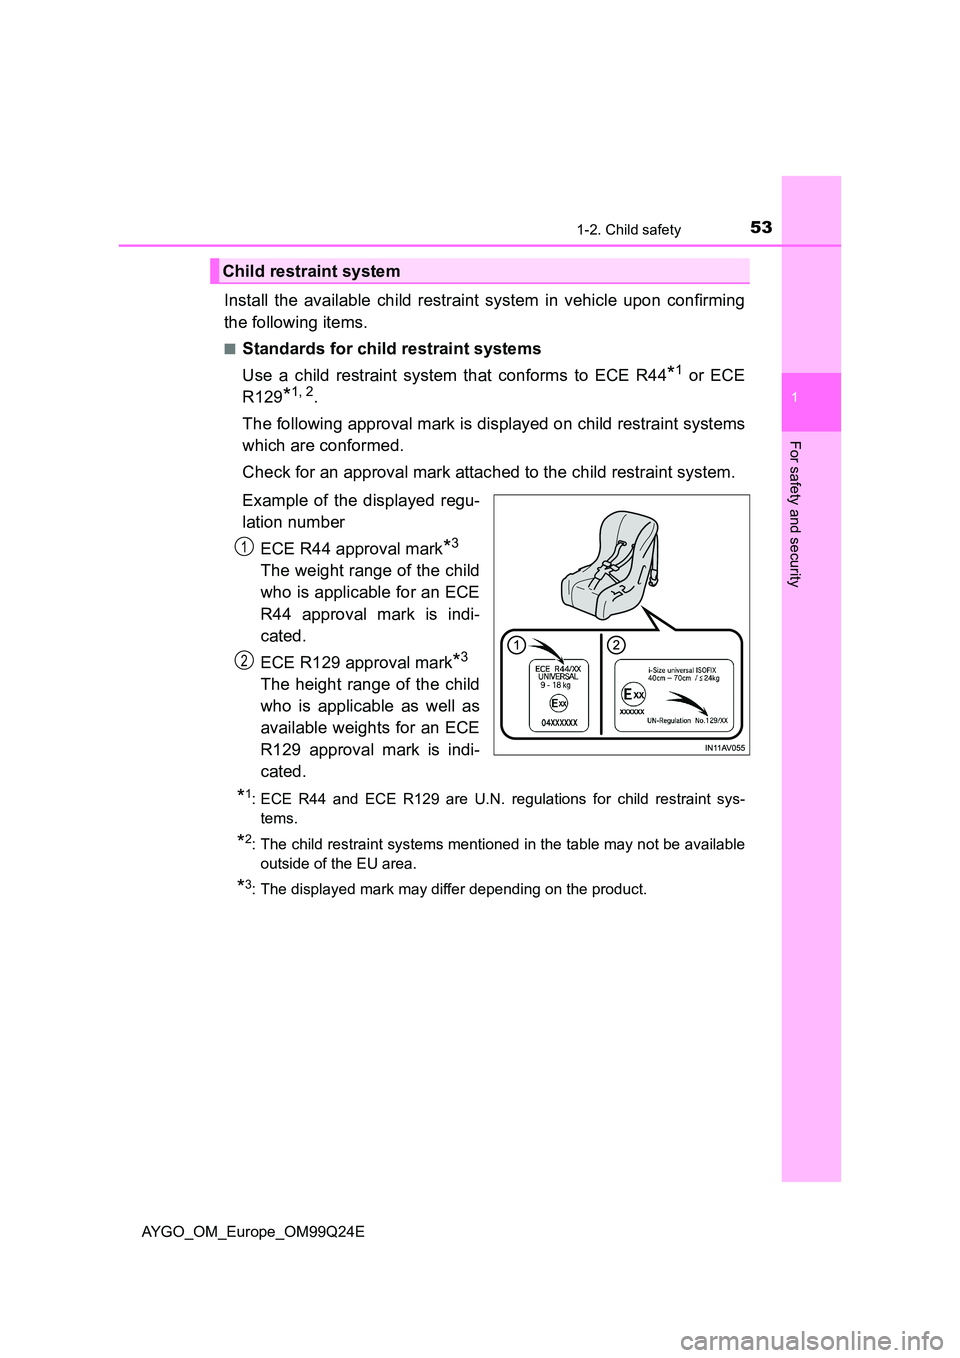 TOYOTA AYGO 2017  Owners Manual (in English) 531-2. Child safety
1
For safety and security
AYGO_OM_Europe_OM99Q24E
Install the available child restraint system in vehicle upon confirming 
the following items.
■Standards for child restraint sys